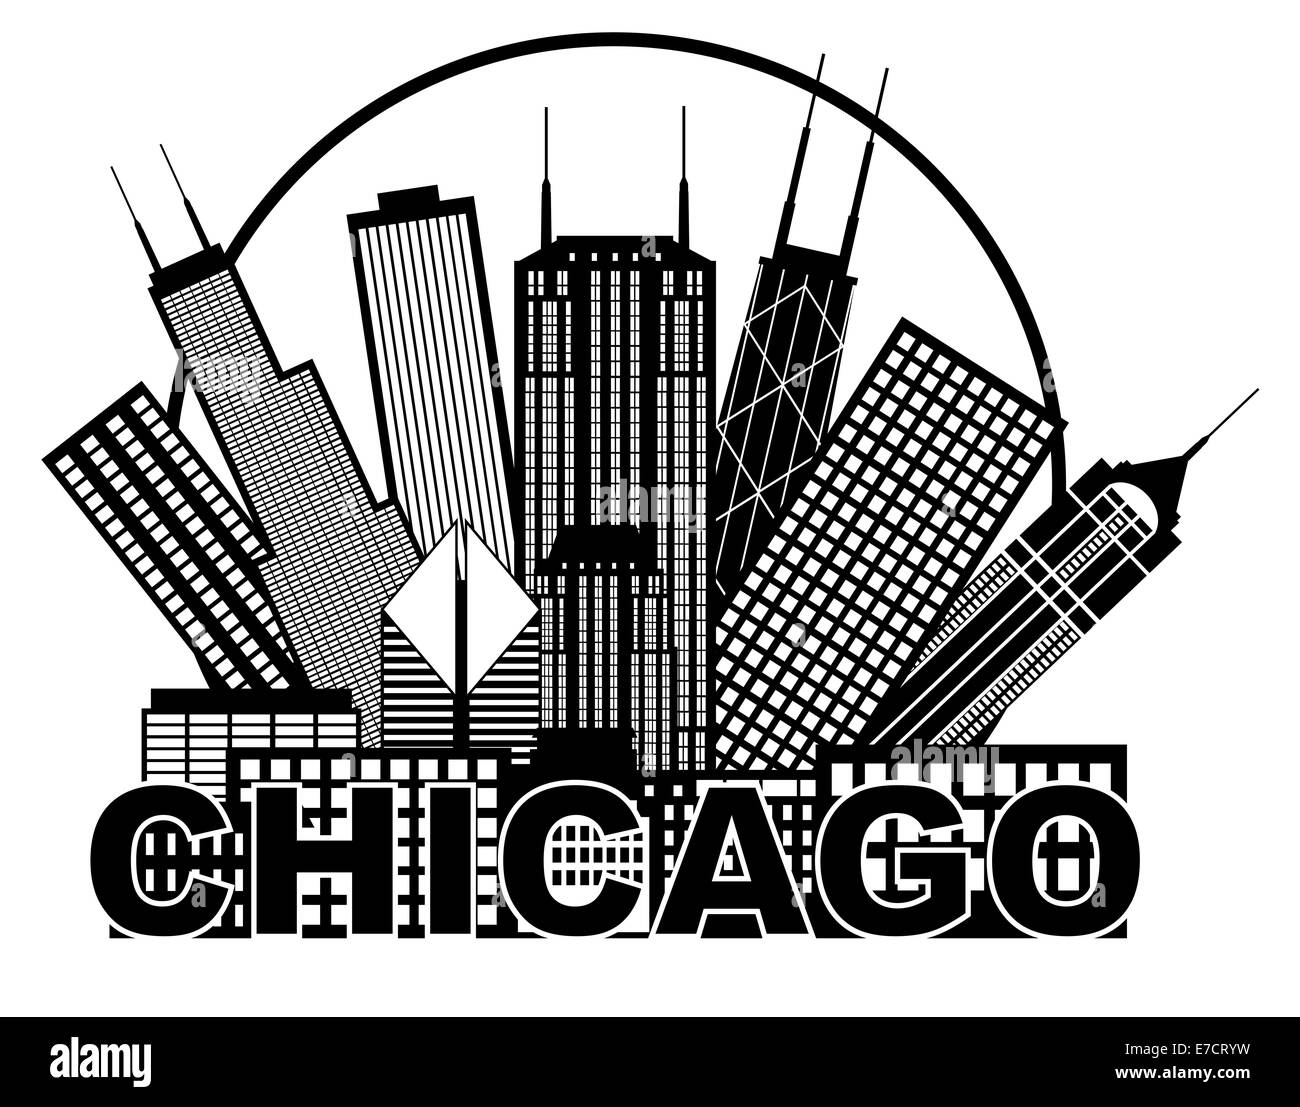 Chicago City Skyline Panorama Black Outline Silhouette in Circle with Text Isolated on White Background Illustration Stock Photo